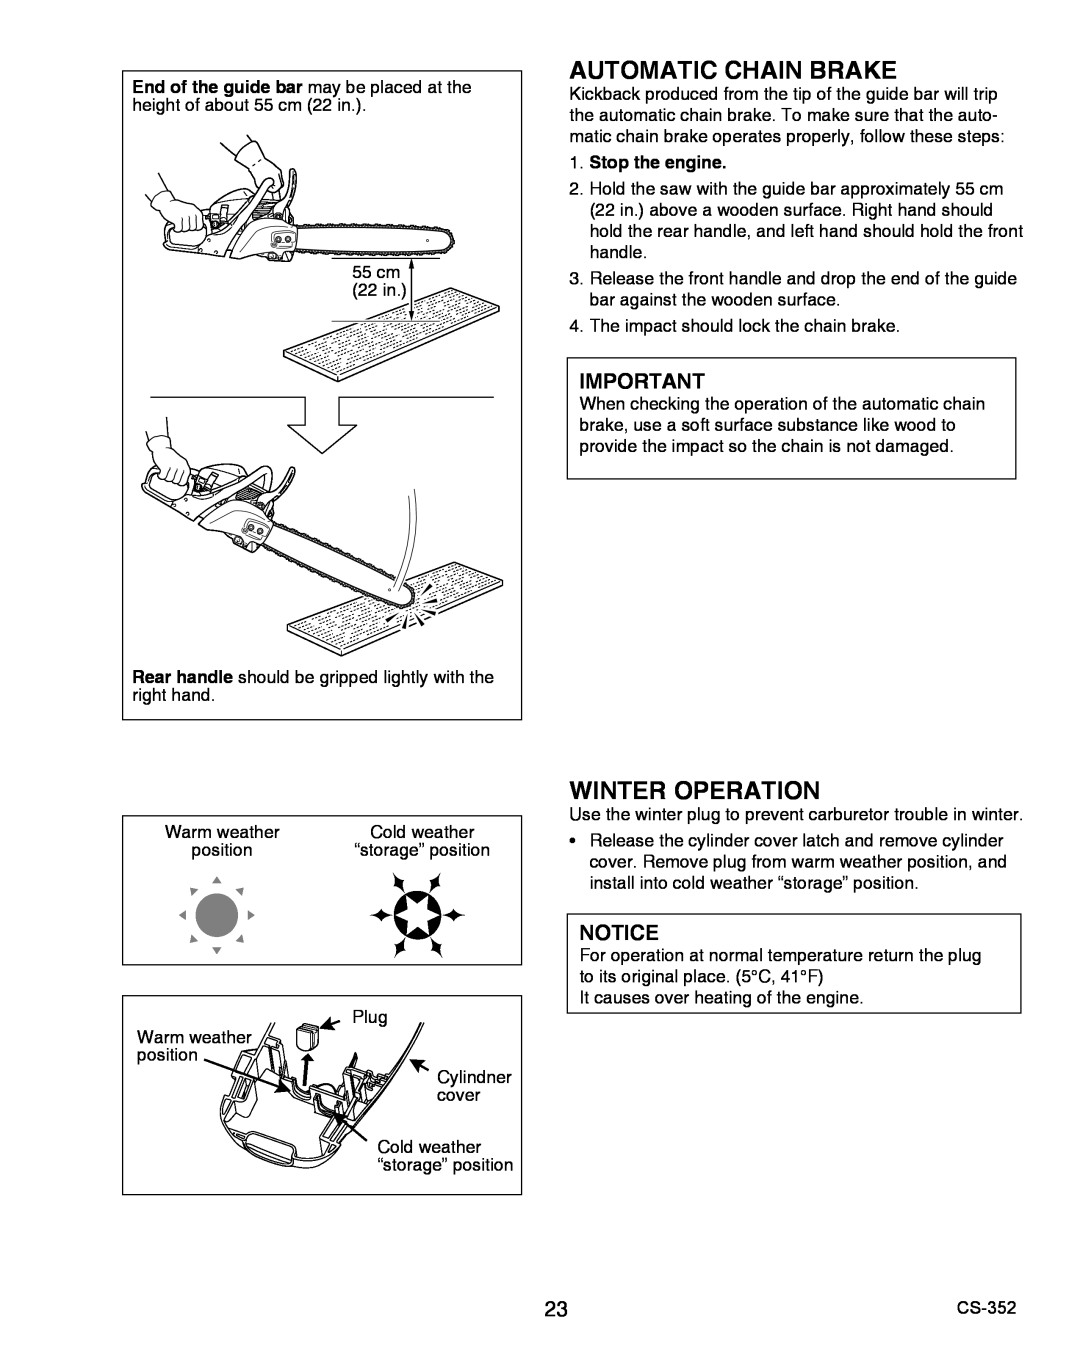 Echo X750020201 instruction manual Automatic Chain Brake, Winter Operation, Stop the engine 